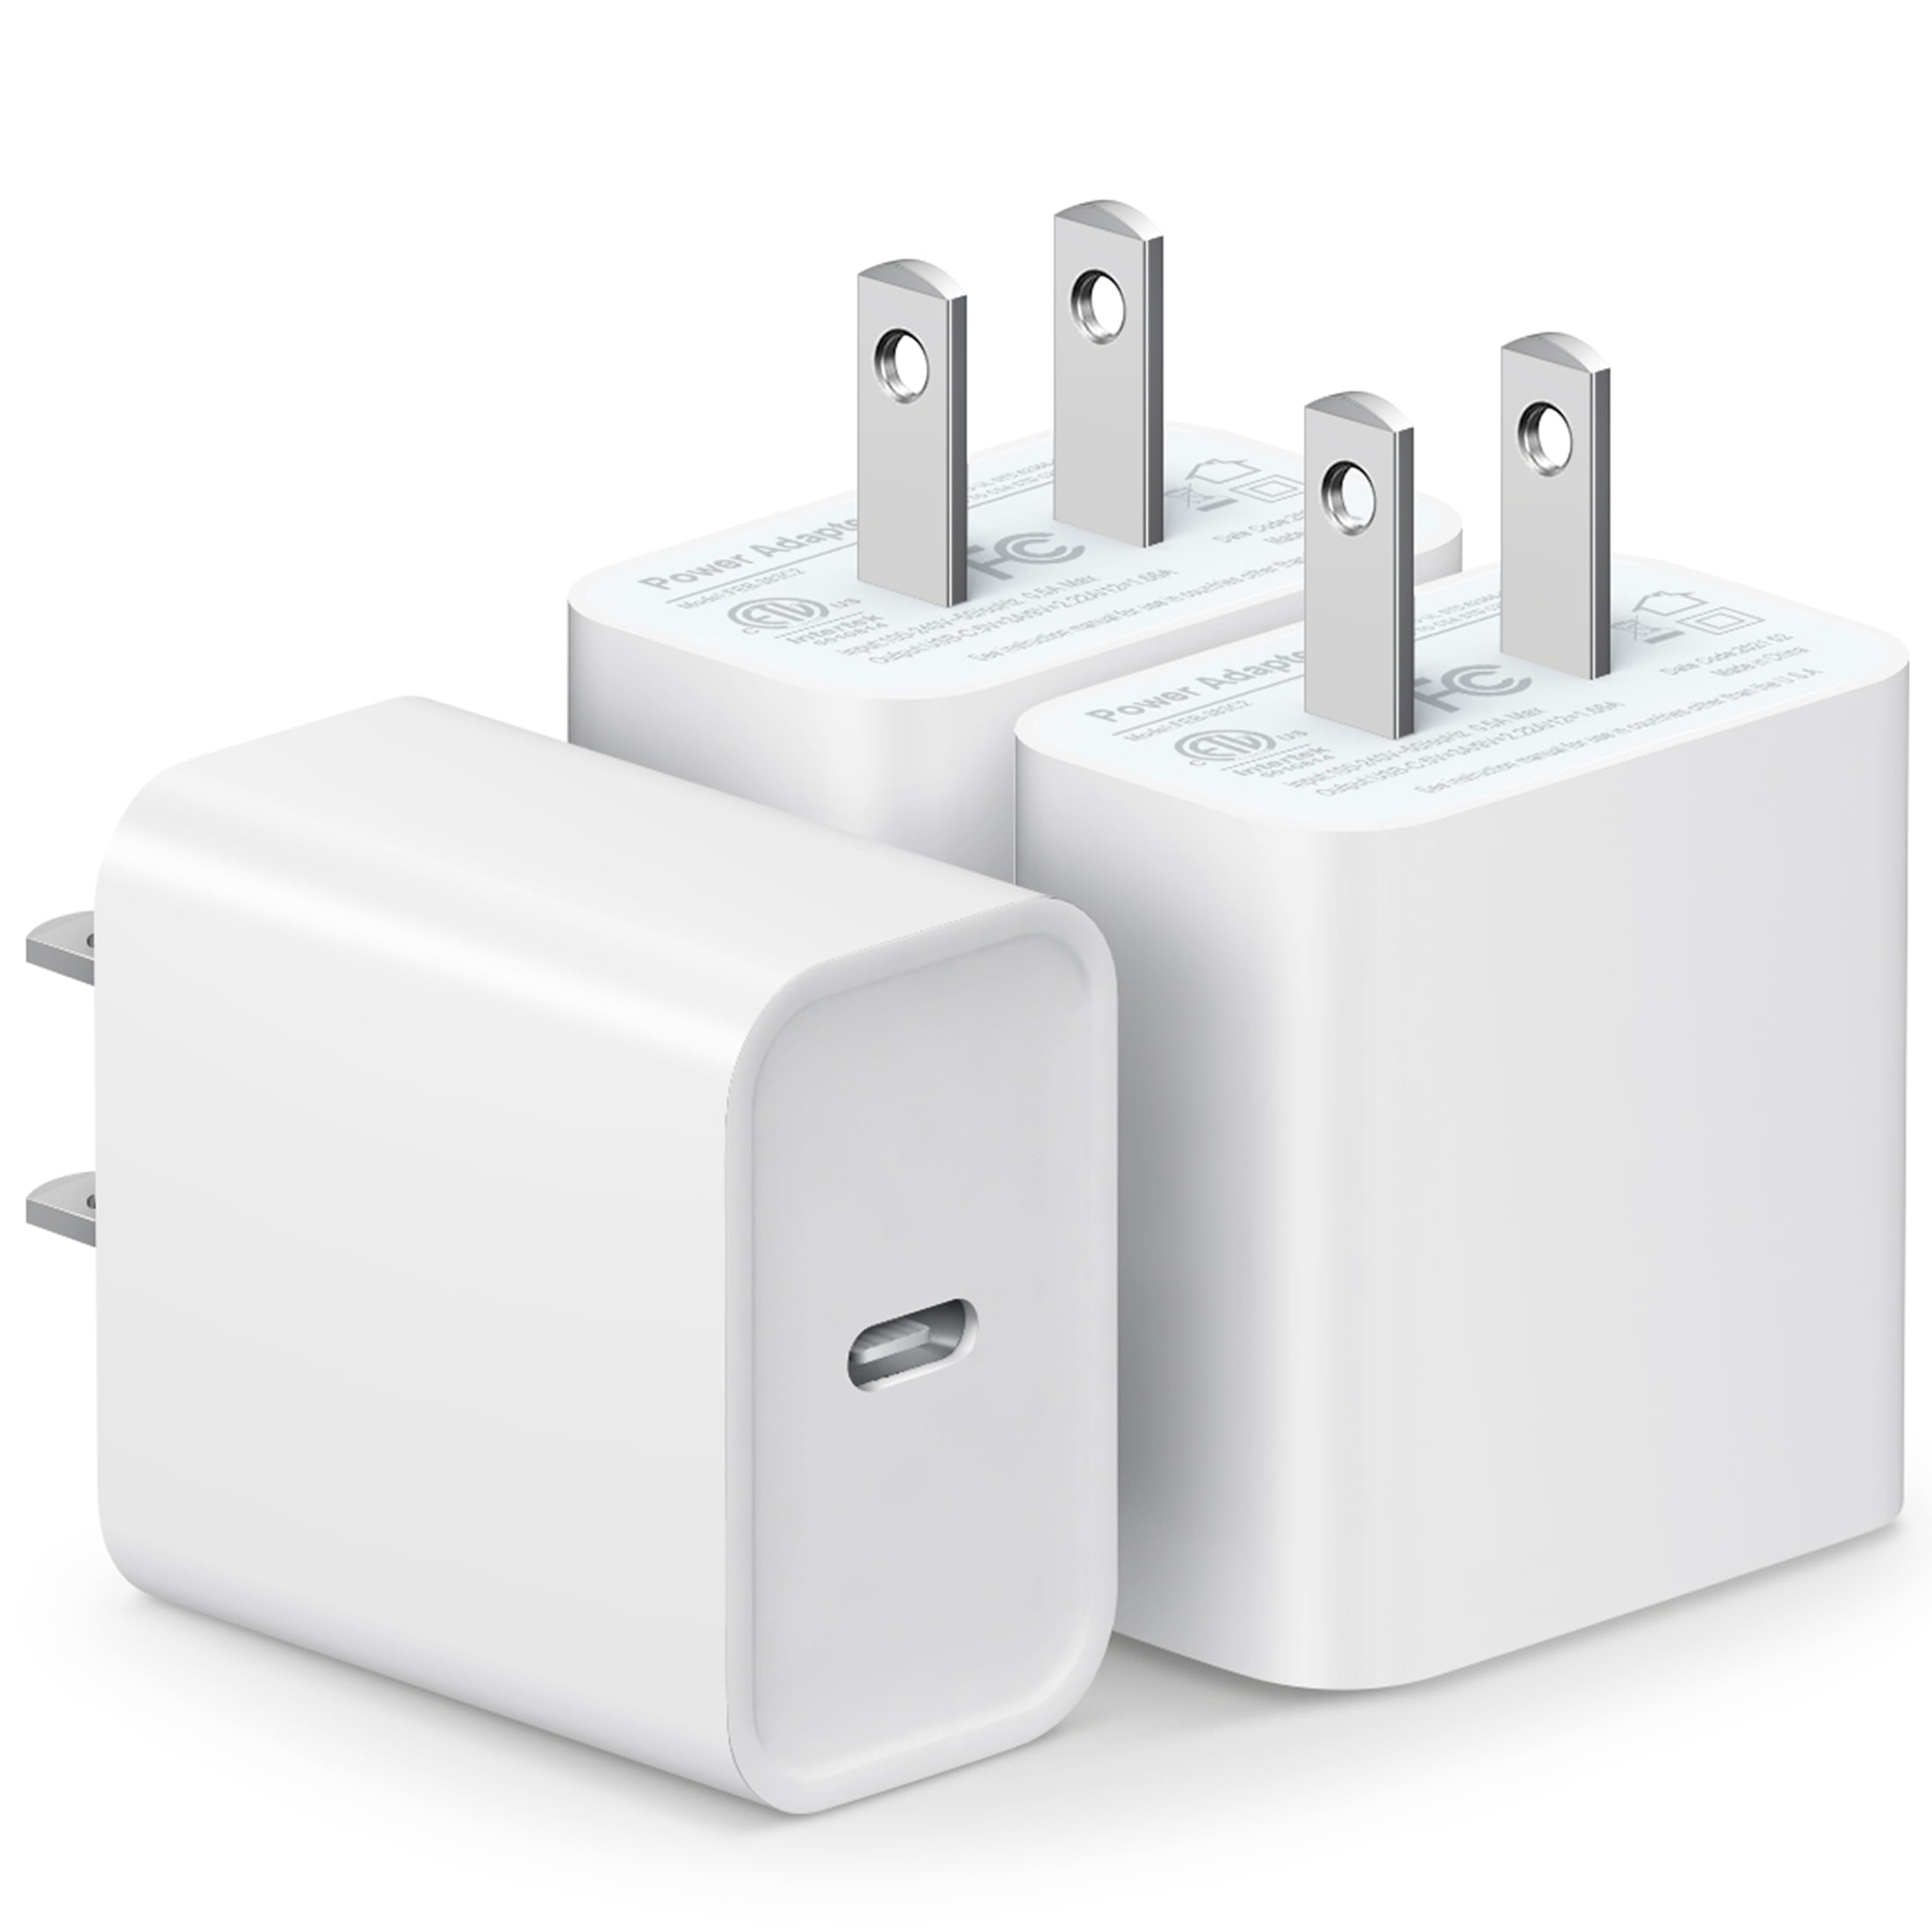 3 Pack USB C Wall Charger-iPhone Fast Charger Block 20W PD Power ...